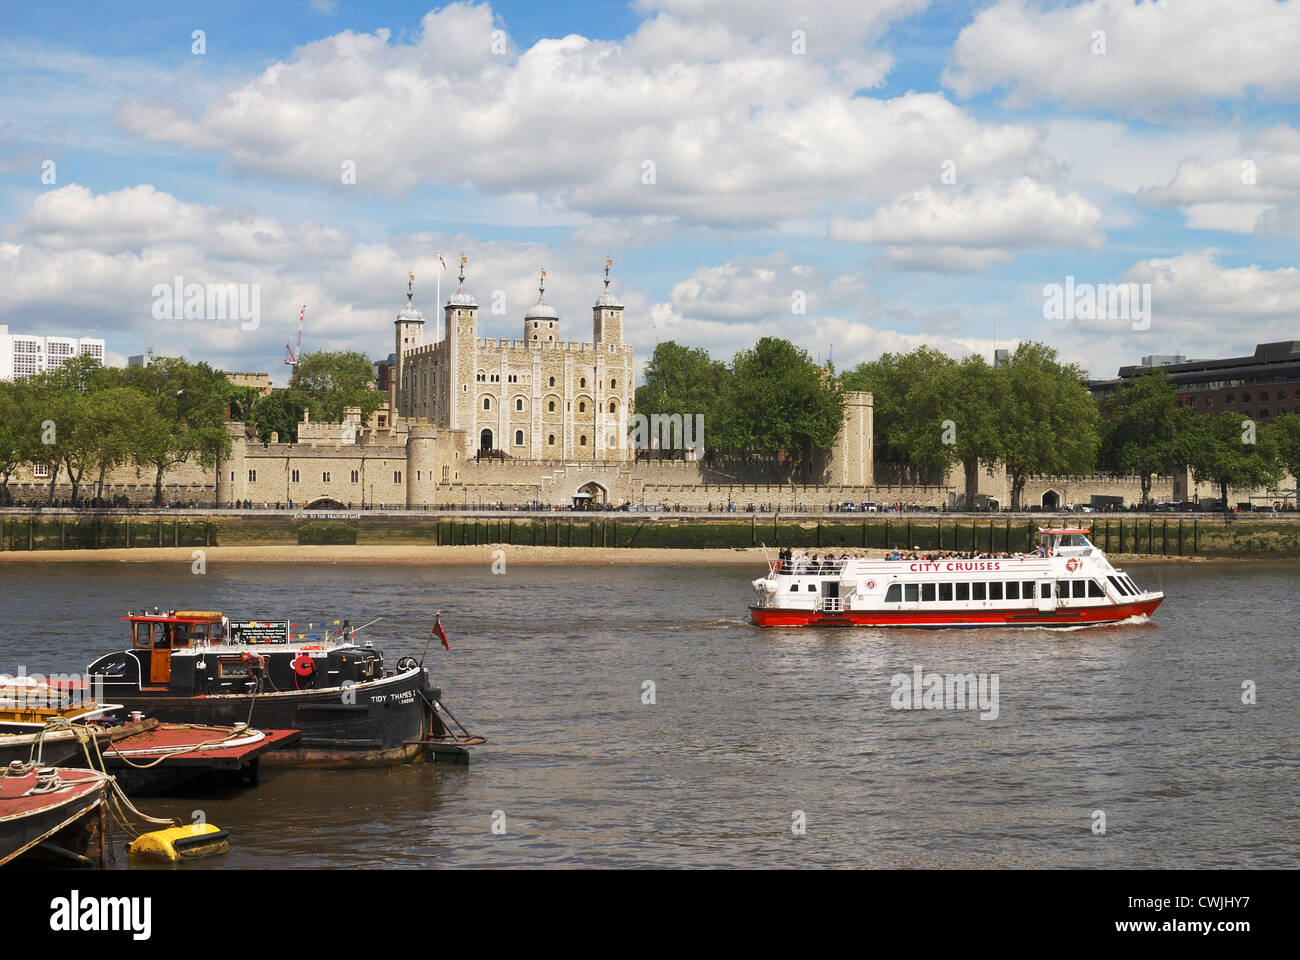 London. England. The Tower of London castle with tourist sightseeing boat on River Thames. View from South Bank Stock Photo